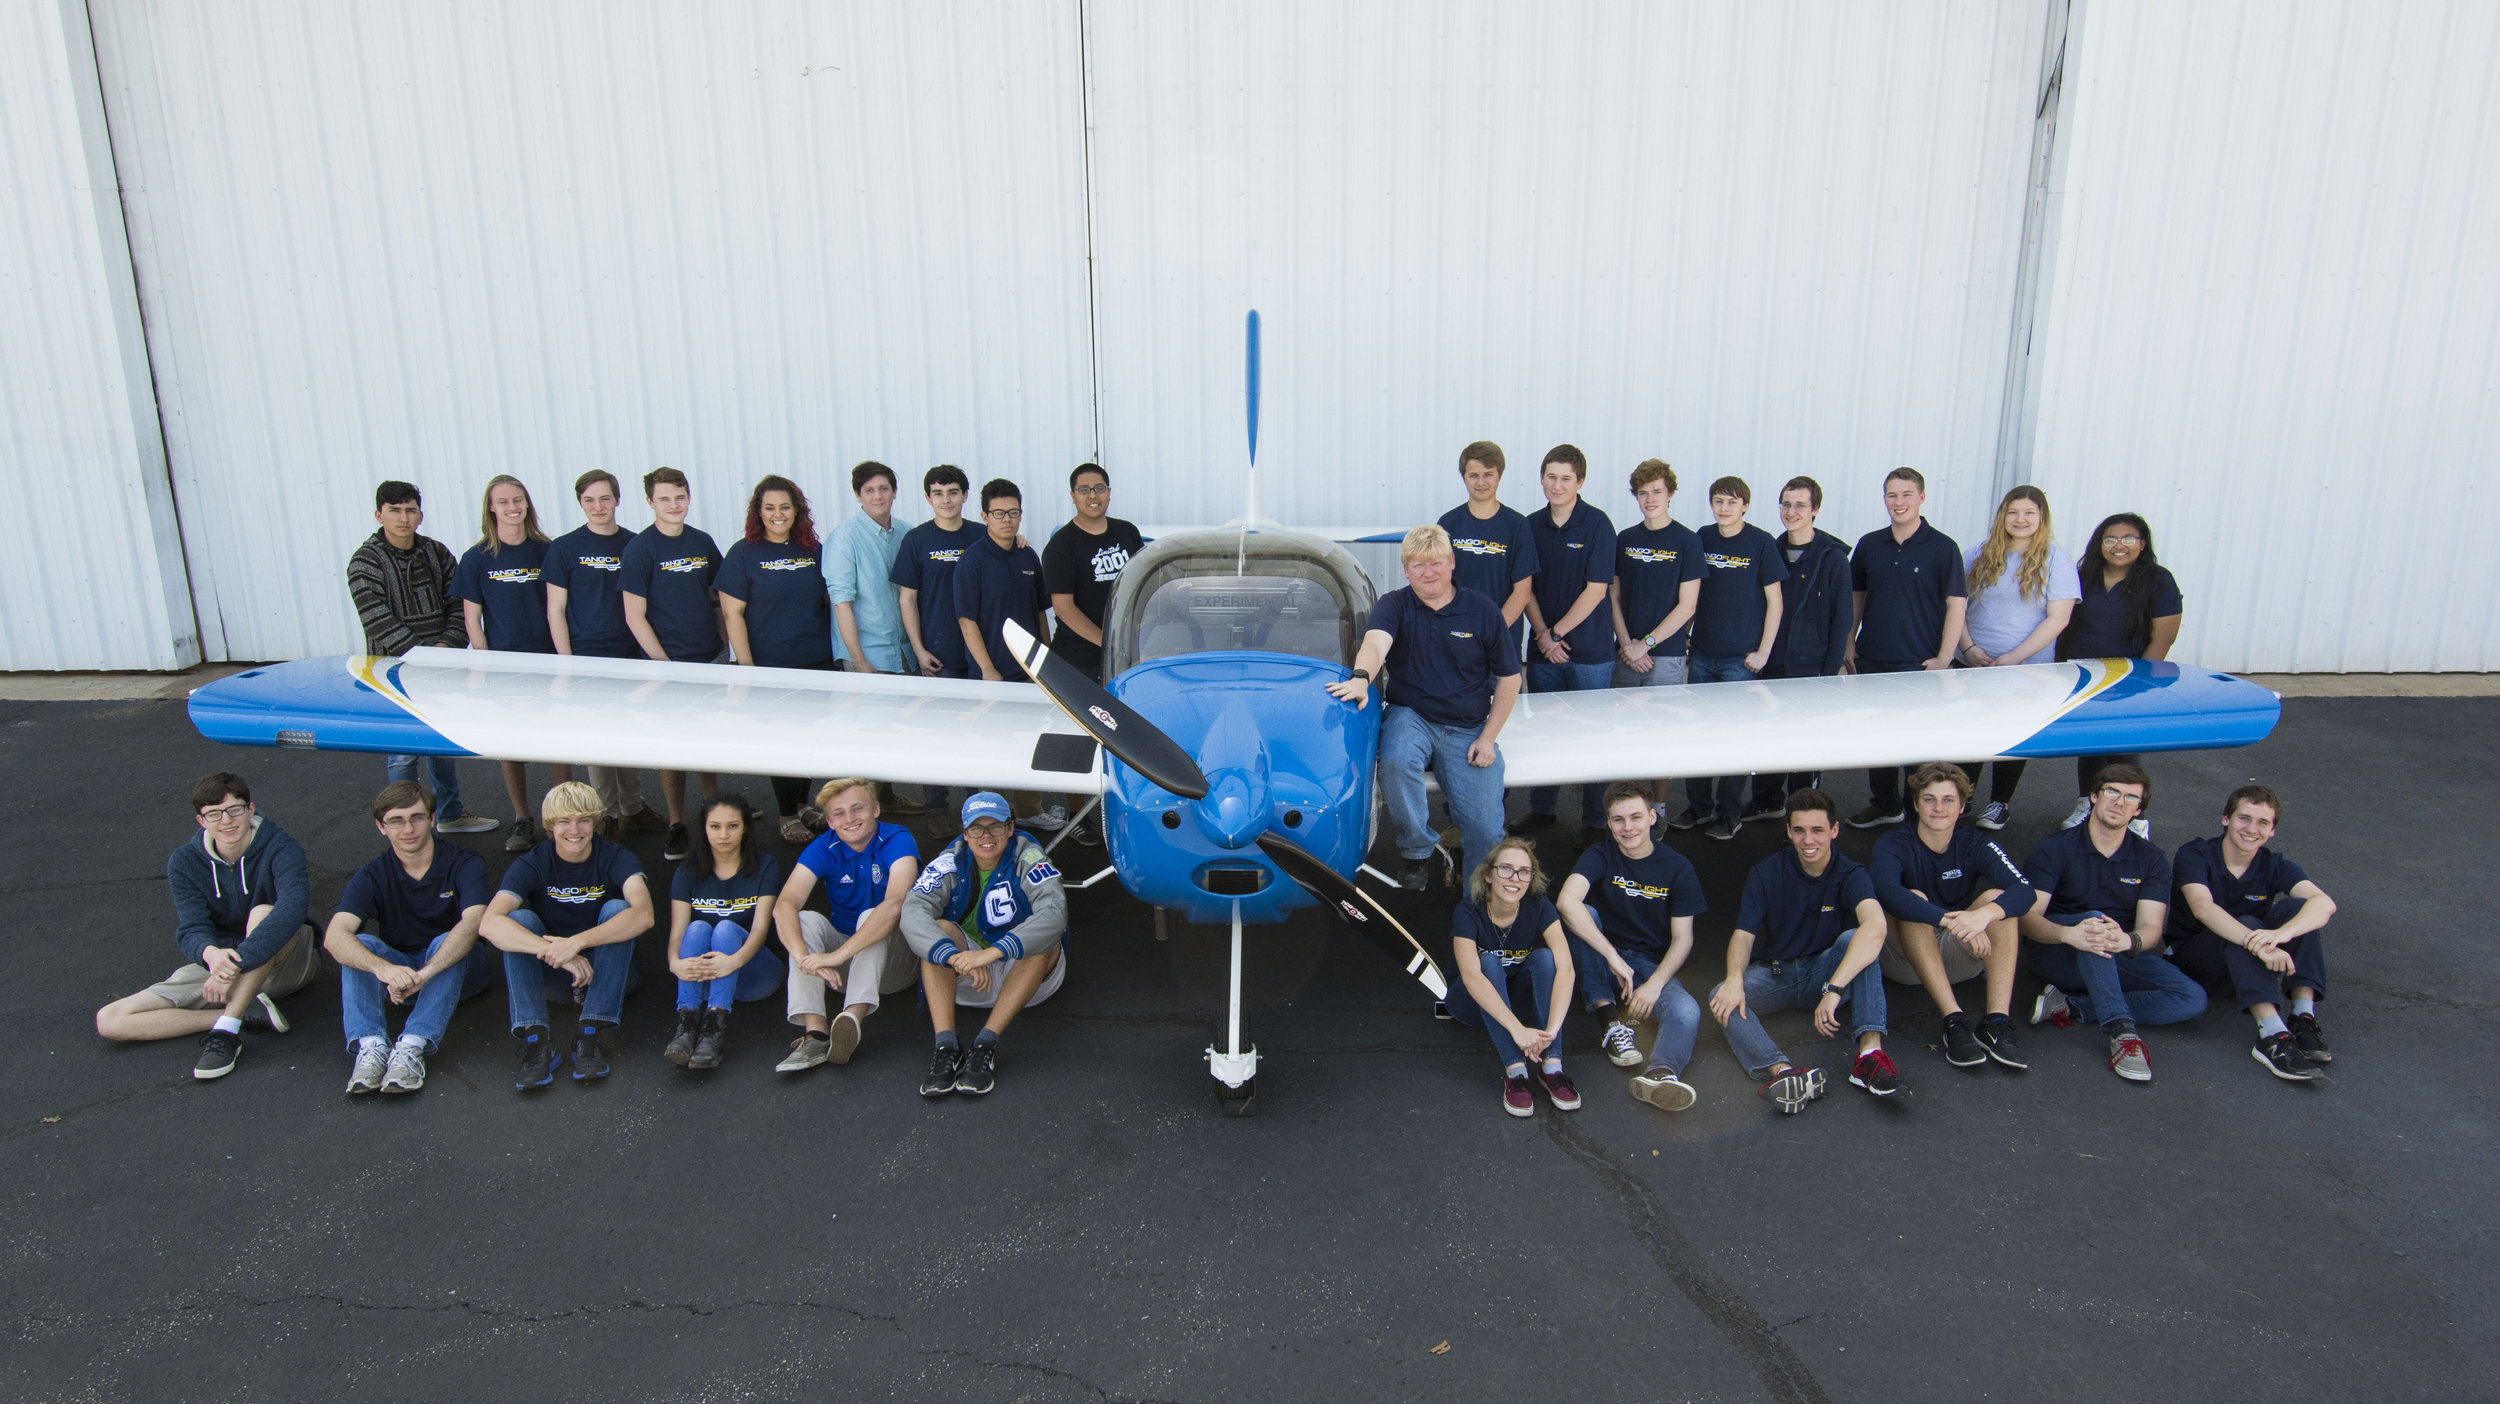 Another “First in Flight”: First Flight High School first in N.C. to offer aircraft construction class